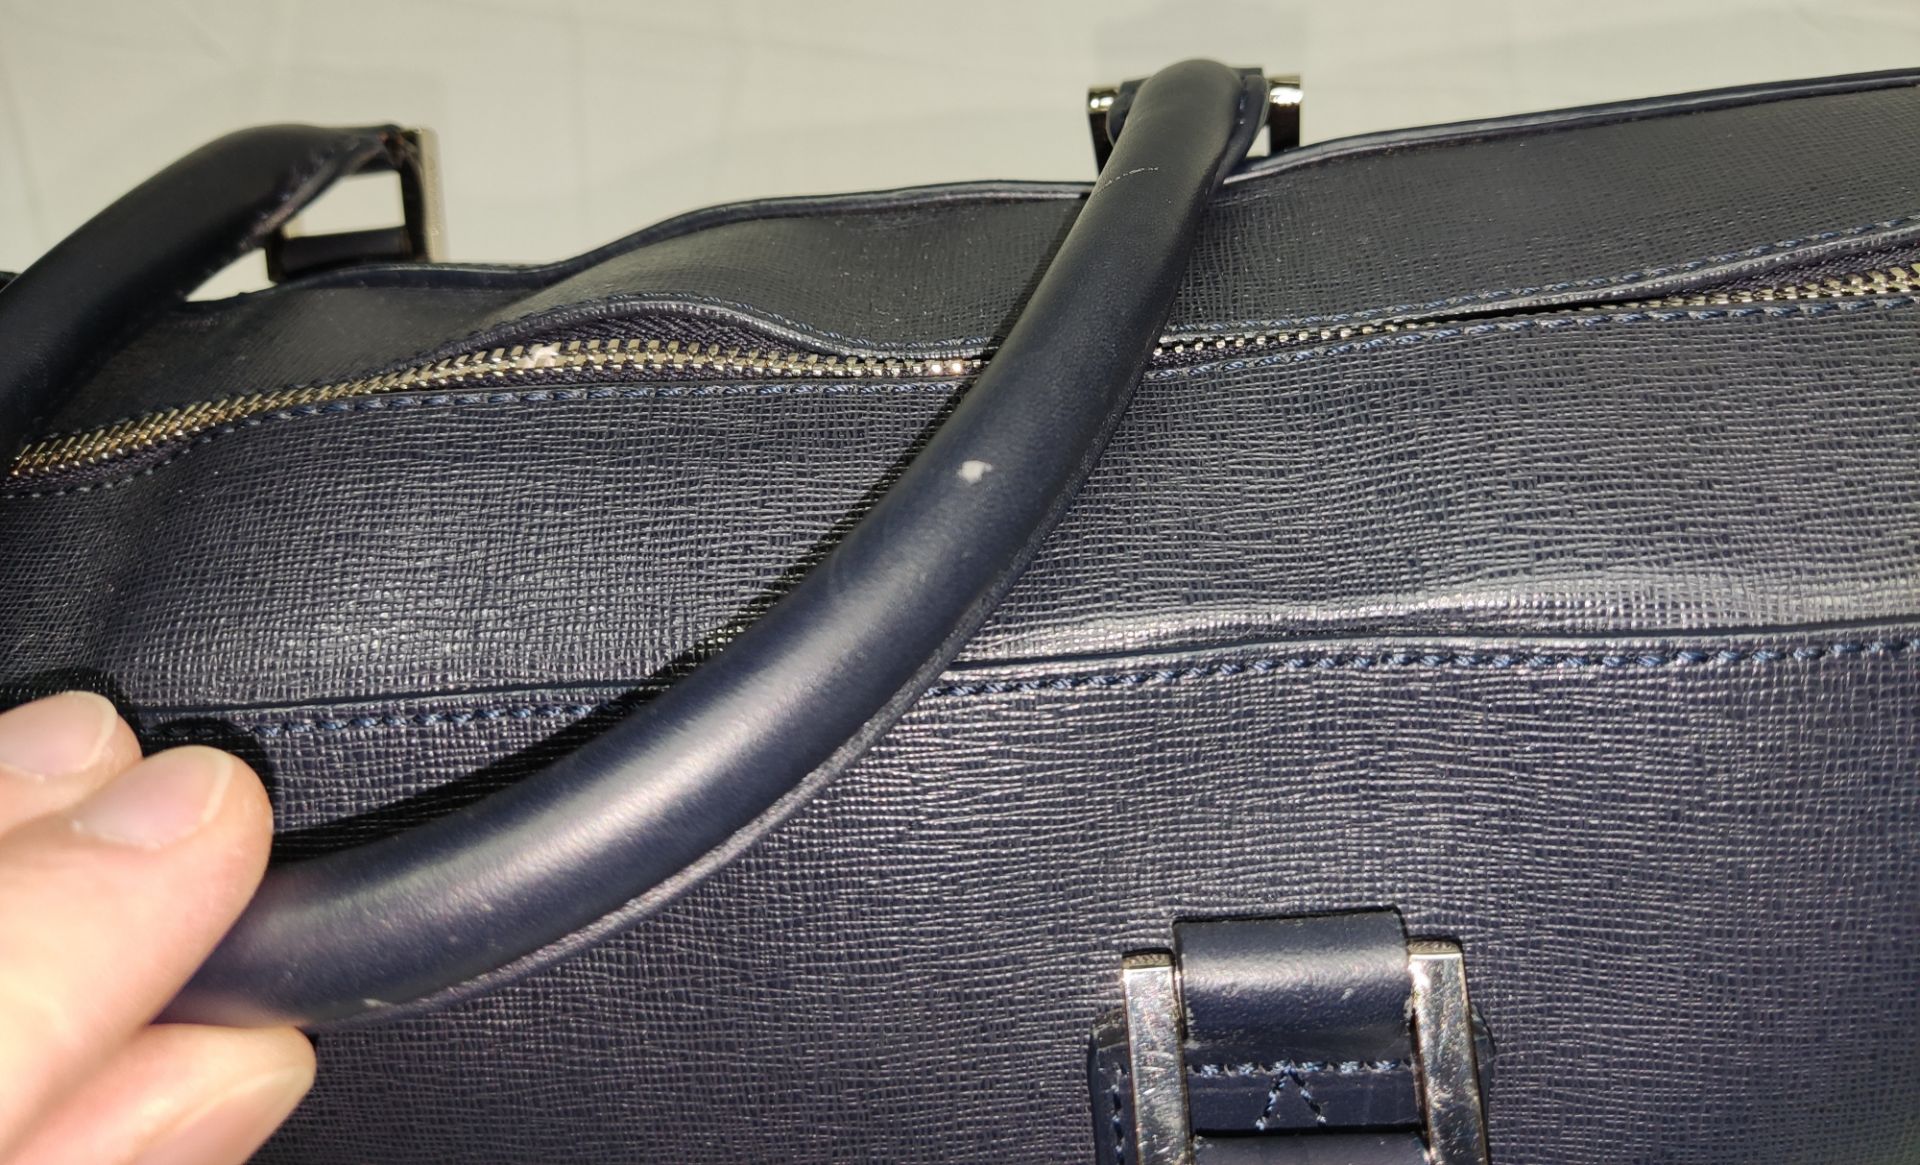 1 x ASPINAL OF LONDON Mount Street Small Laptop Bag In Black Saffiano - Original RRP £650.00 - Image 8 of 21